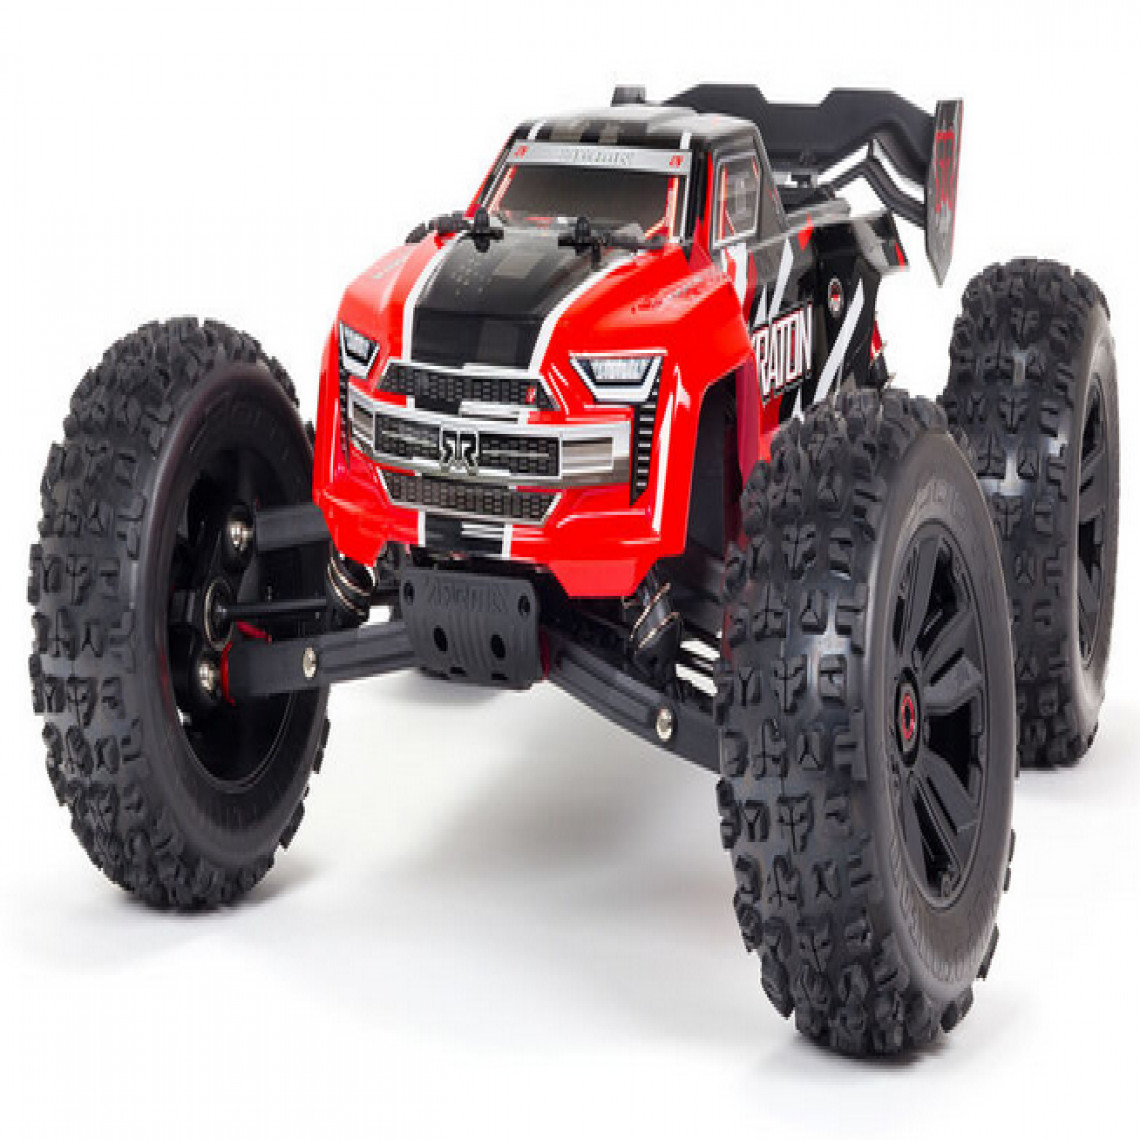 Arrma - KRATON 6S 4WD BLX 1/8e Speed Monster Truck RTR Rouge - Arrma - Voitures RC